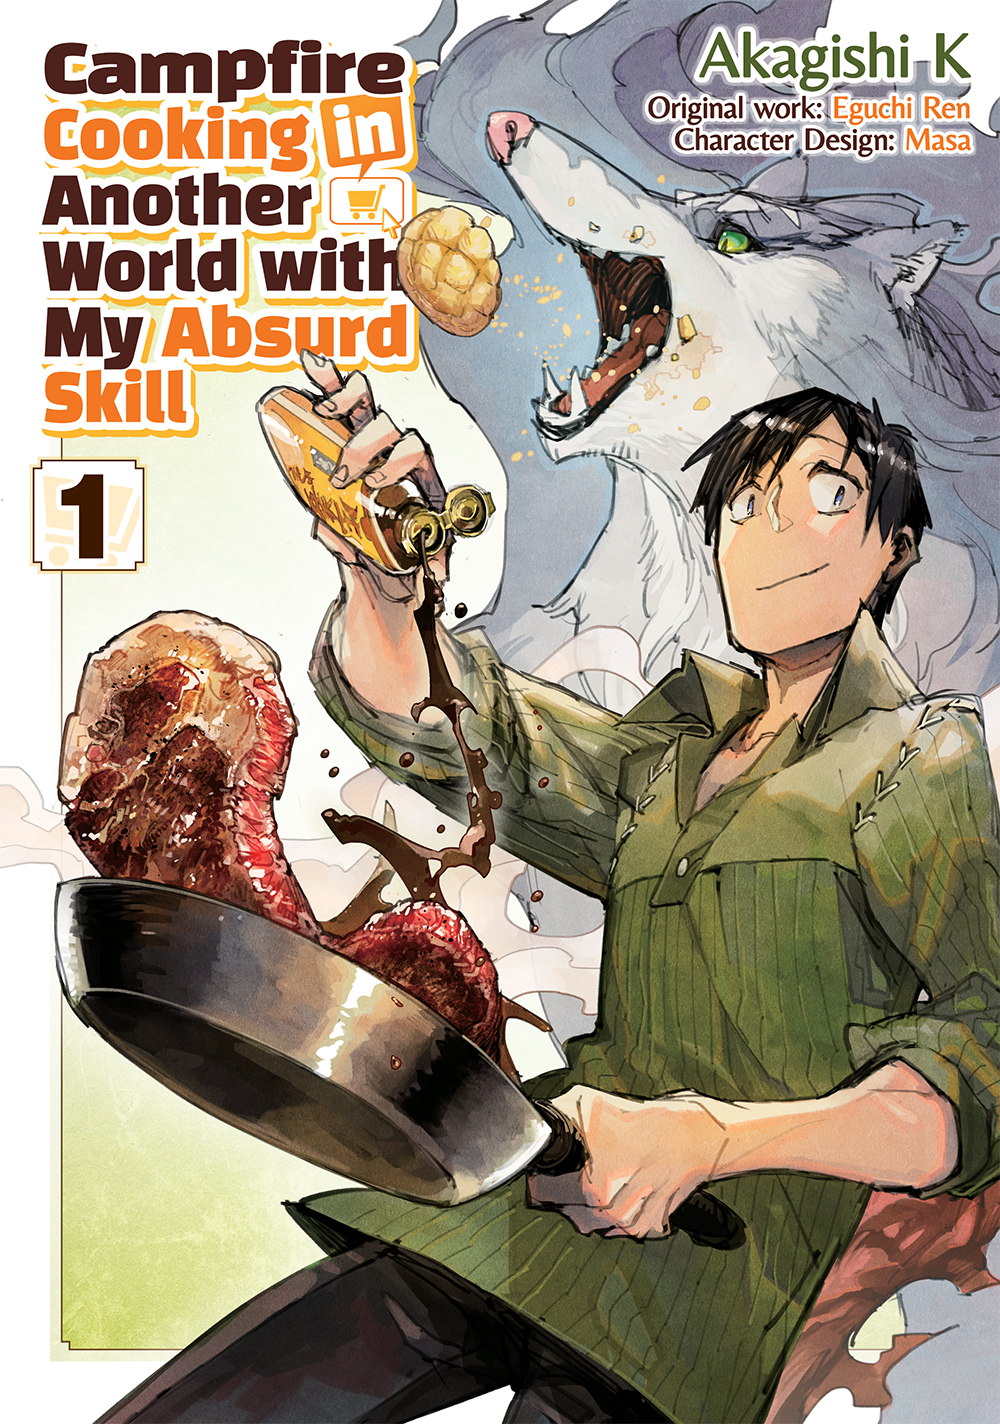 Campfire Cooking in Another World with My Absurd Skill cover